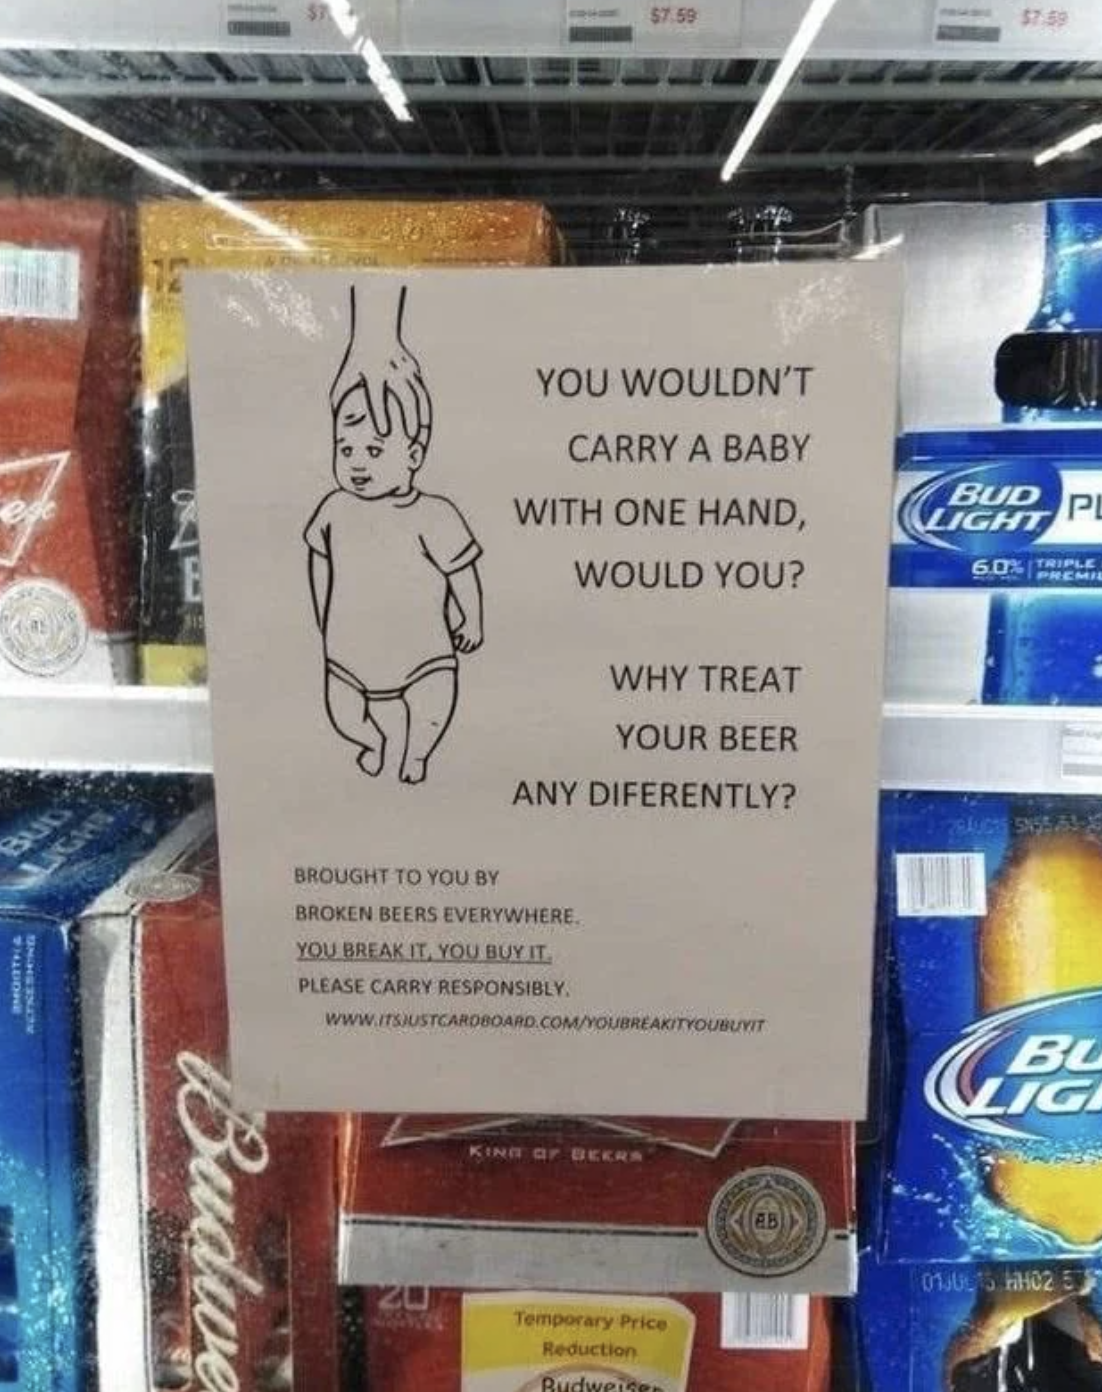 &quot;You wouldn&#x27;t carry a baby with one hand, would you? Why treat your beer any differently?&quot;